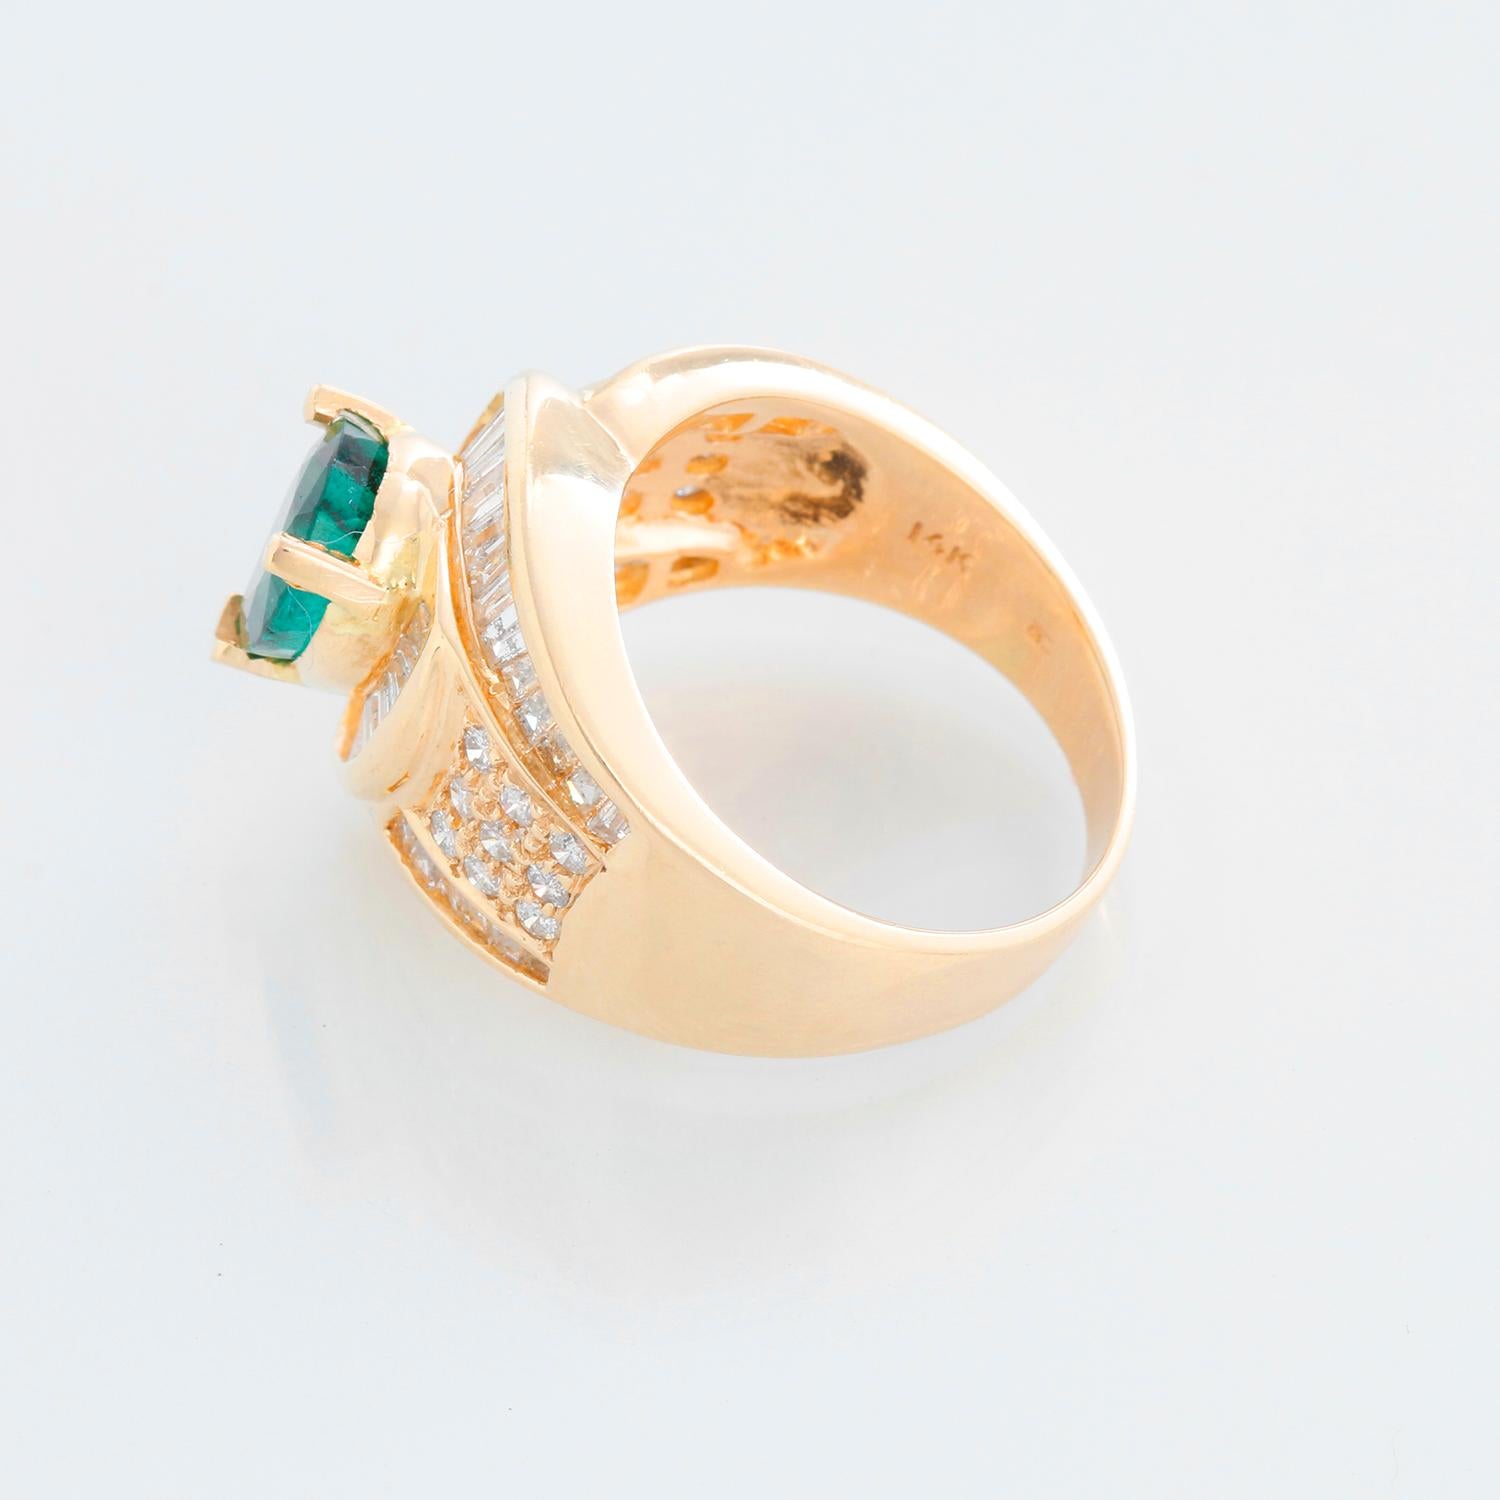 Emerald and Diamond Fashion 14K Yellow Gold Ring Size 7 1/4 - The ring features a 3-prong setting containing one center pear faceted emerald measuring 9.50 x 7.07 x 3.70 mm. Estimated weight 1.18 carats. The emerald is surrounded by 38 baguette cut